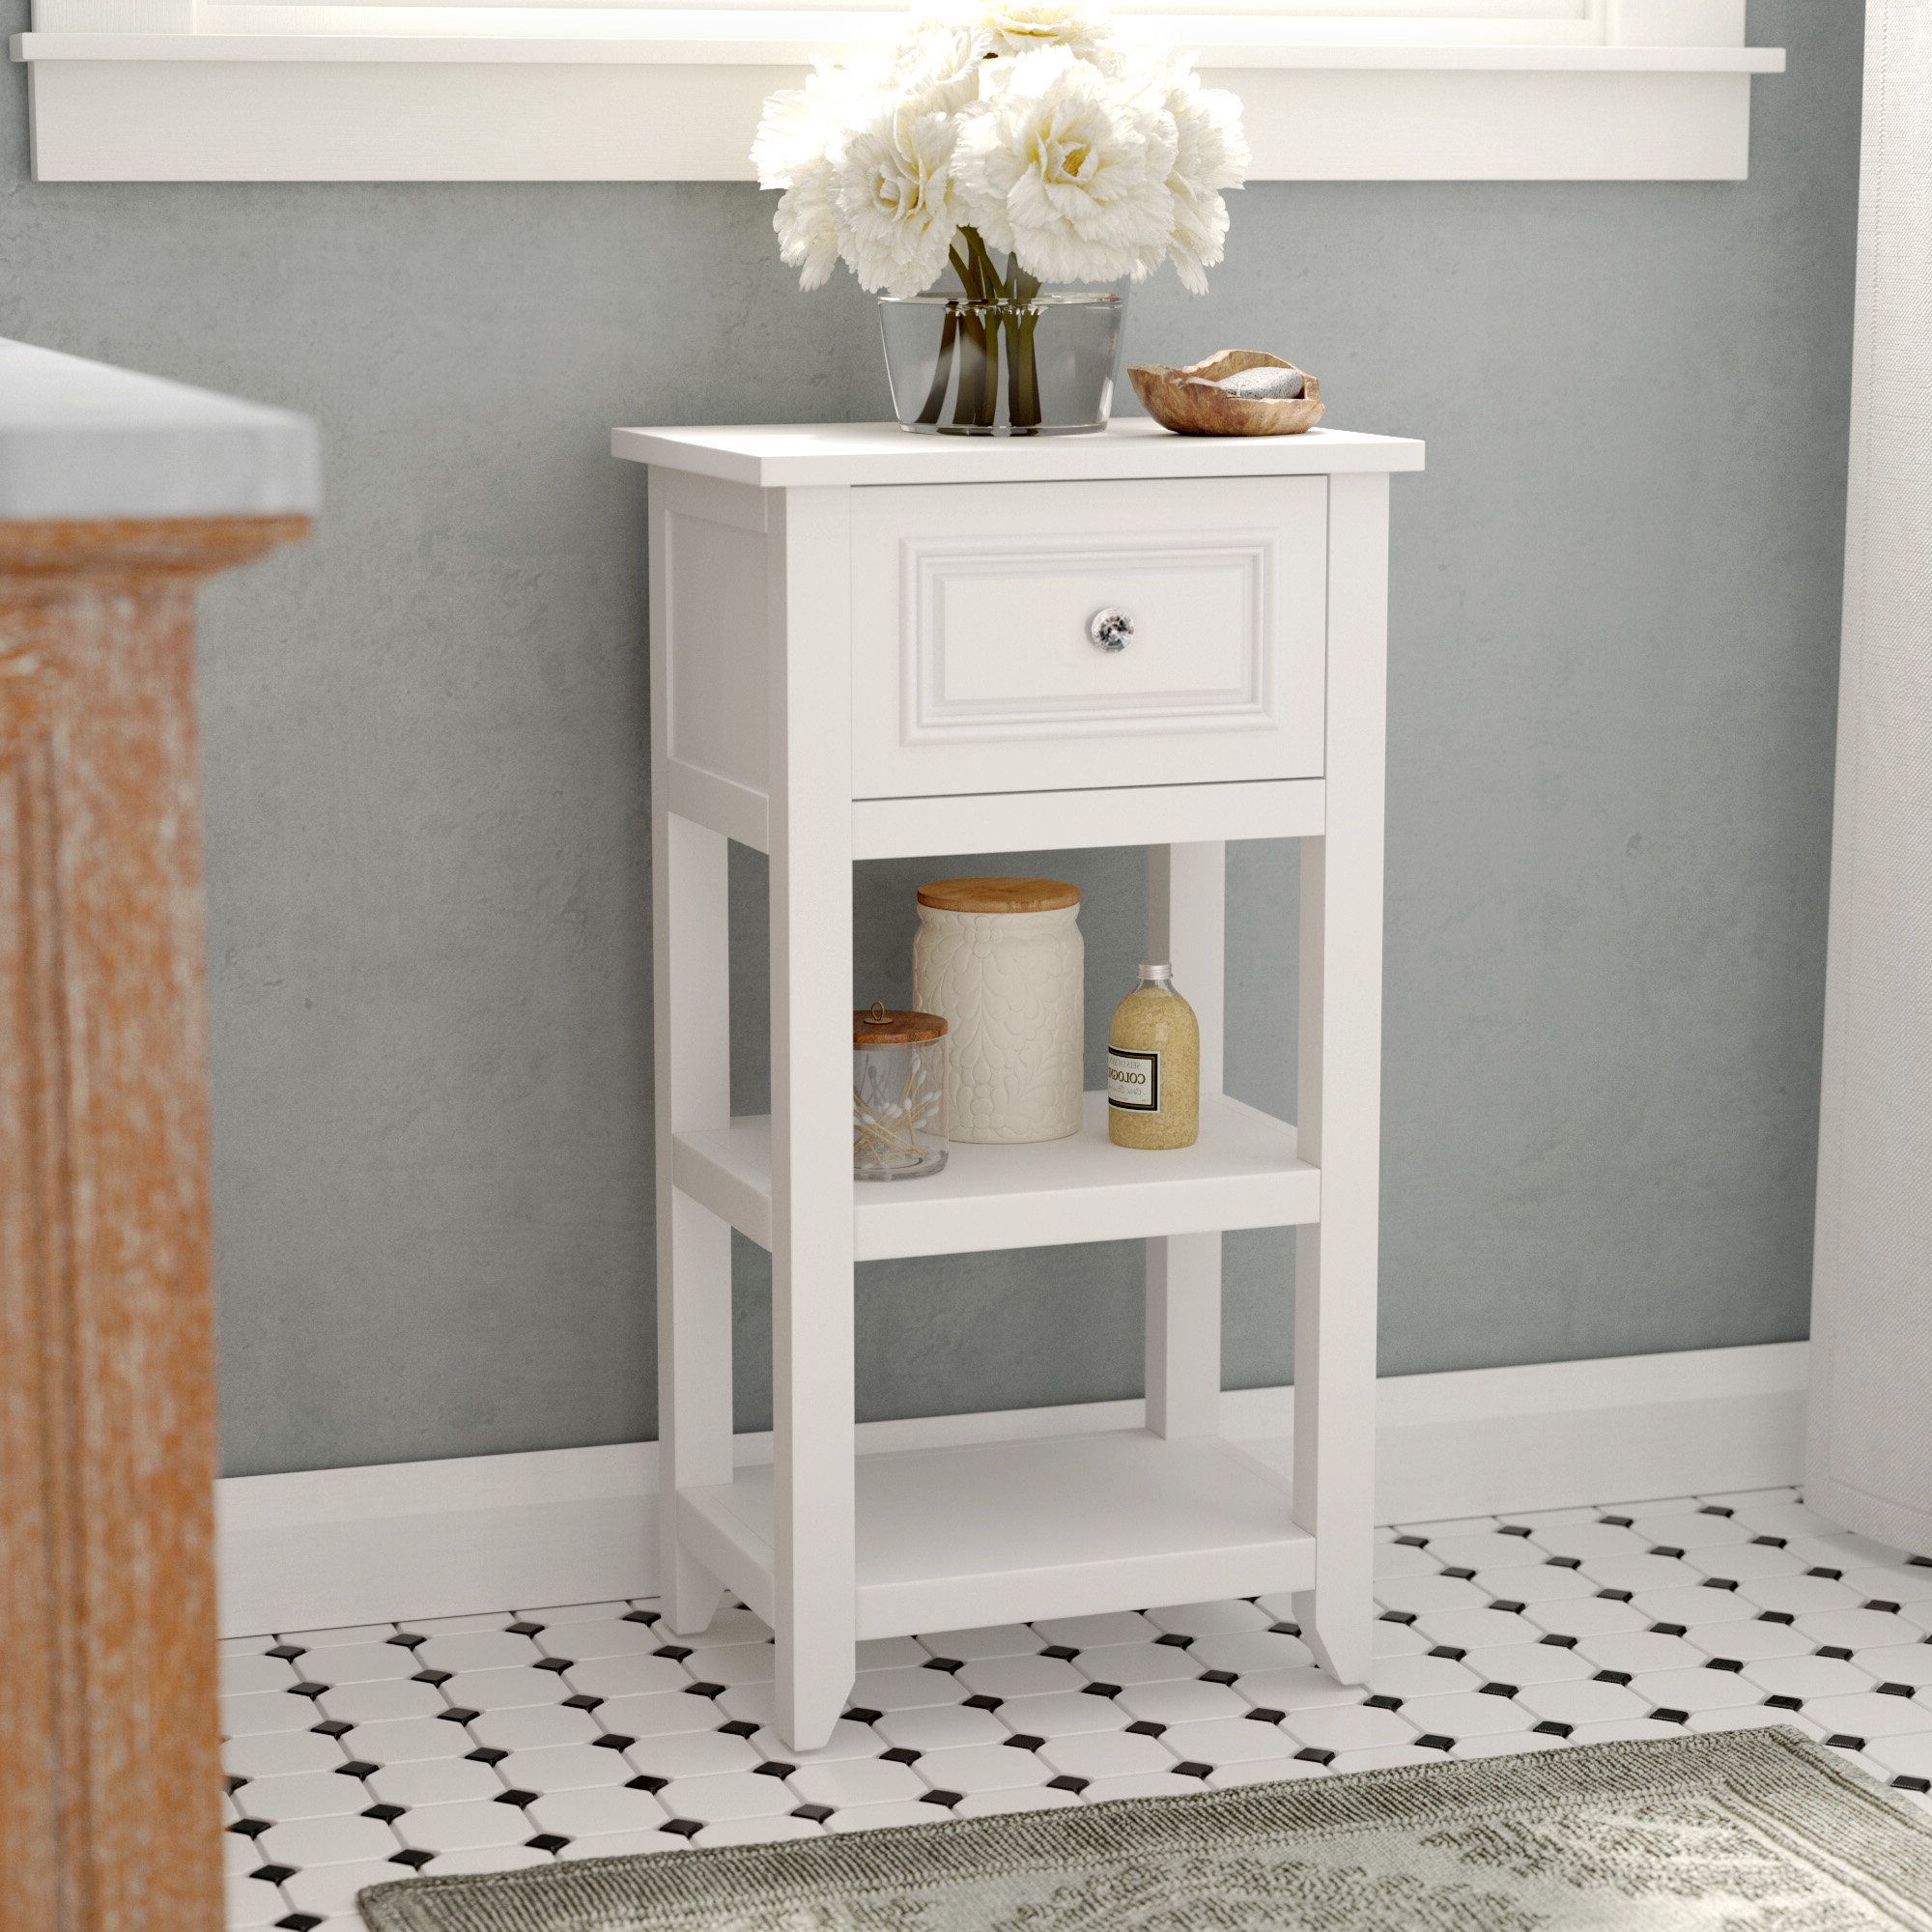 Beachcrest Home Woodley Freestanding Bathroom Cabinet & Reviews | Wayfair Within Freestanding Tables With Drawers (View 9 of 20)